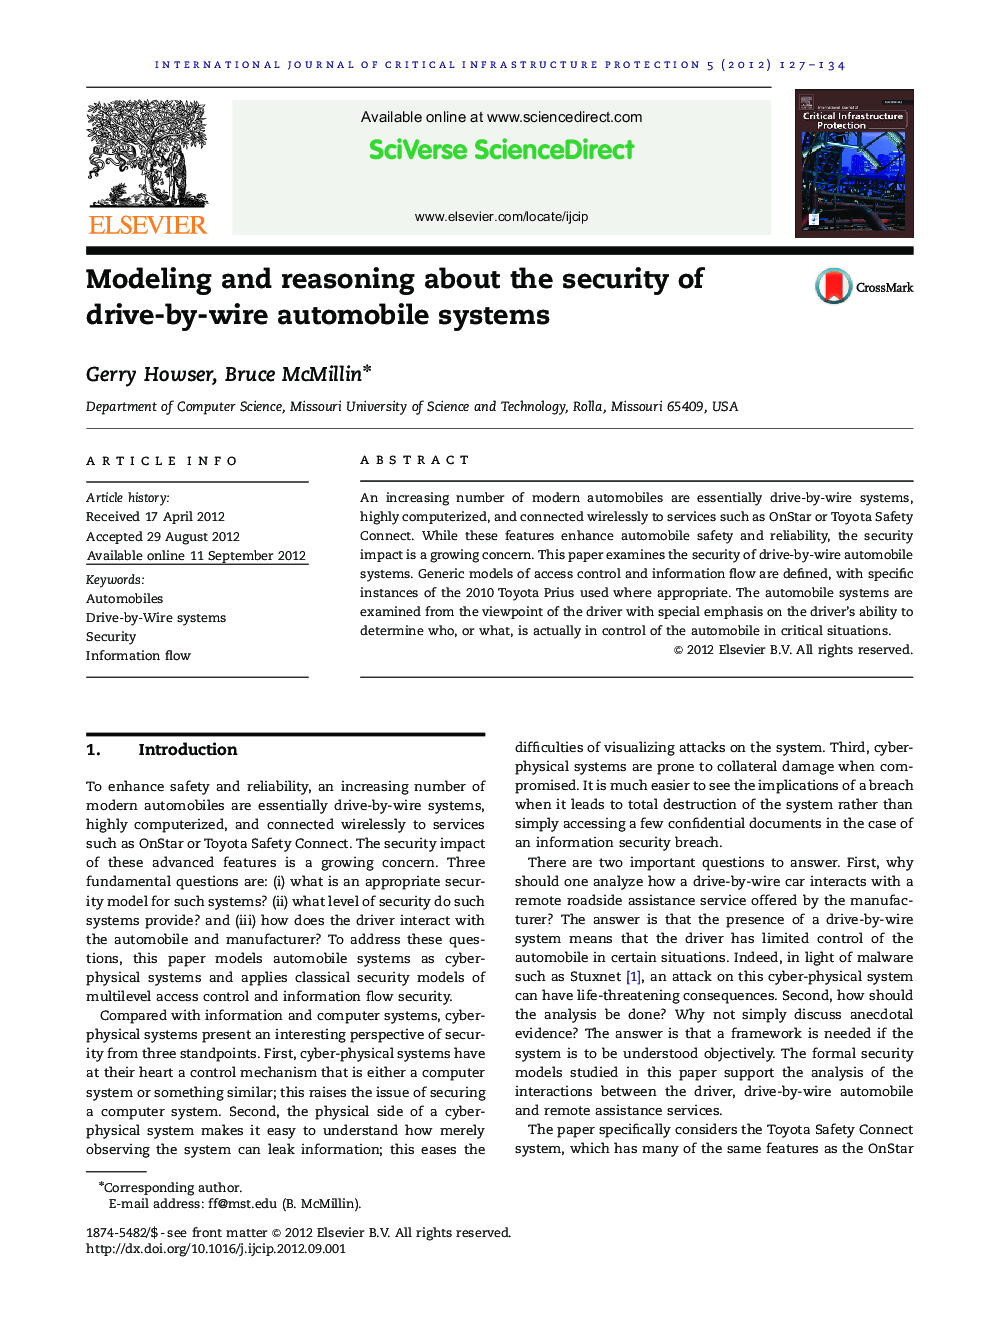 Modeling and reasoning about the security of drive-by-wire automobile systems